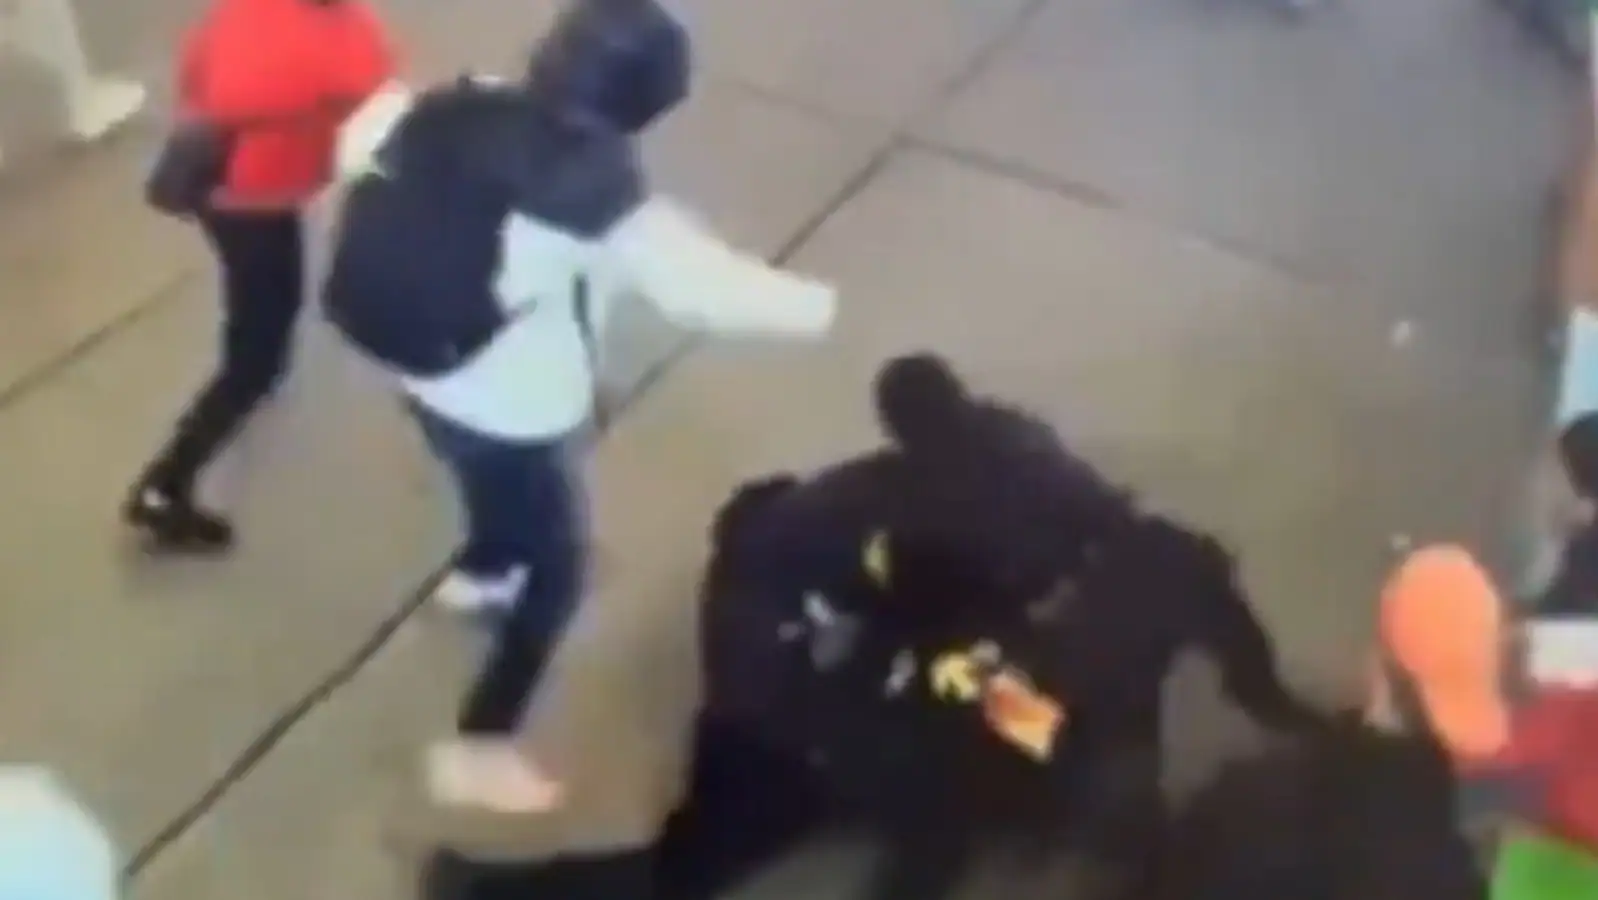 NYPD Seeks Suspects in NYC Bat Attack Captured on New Video